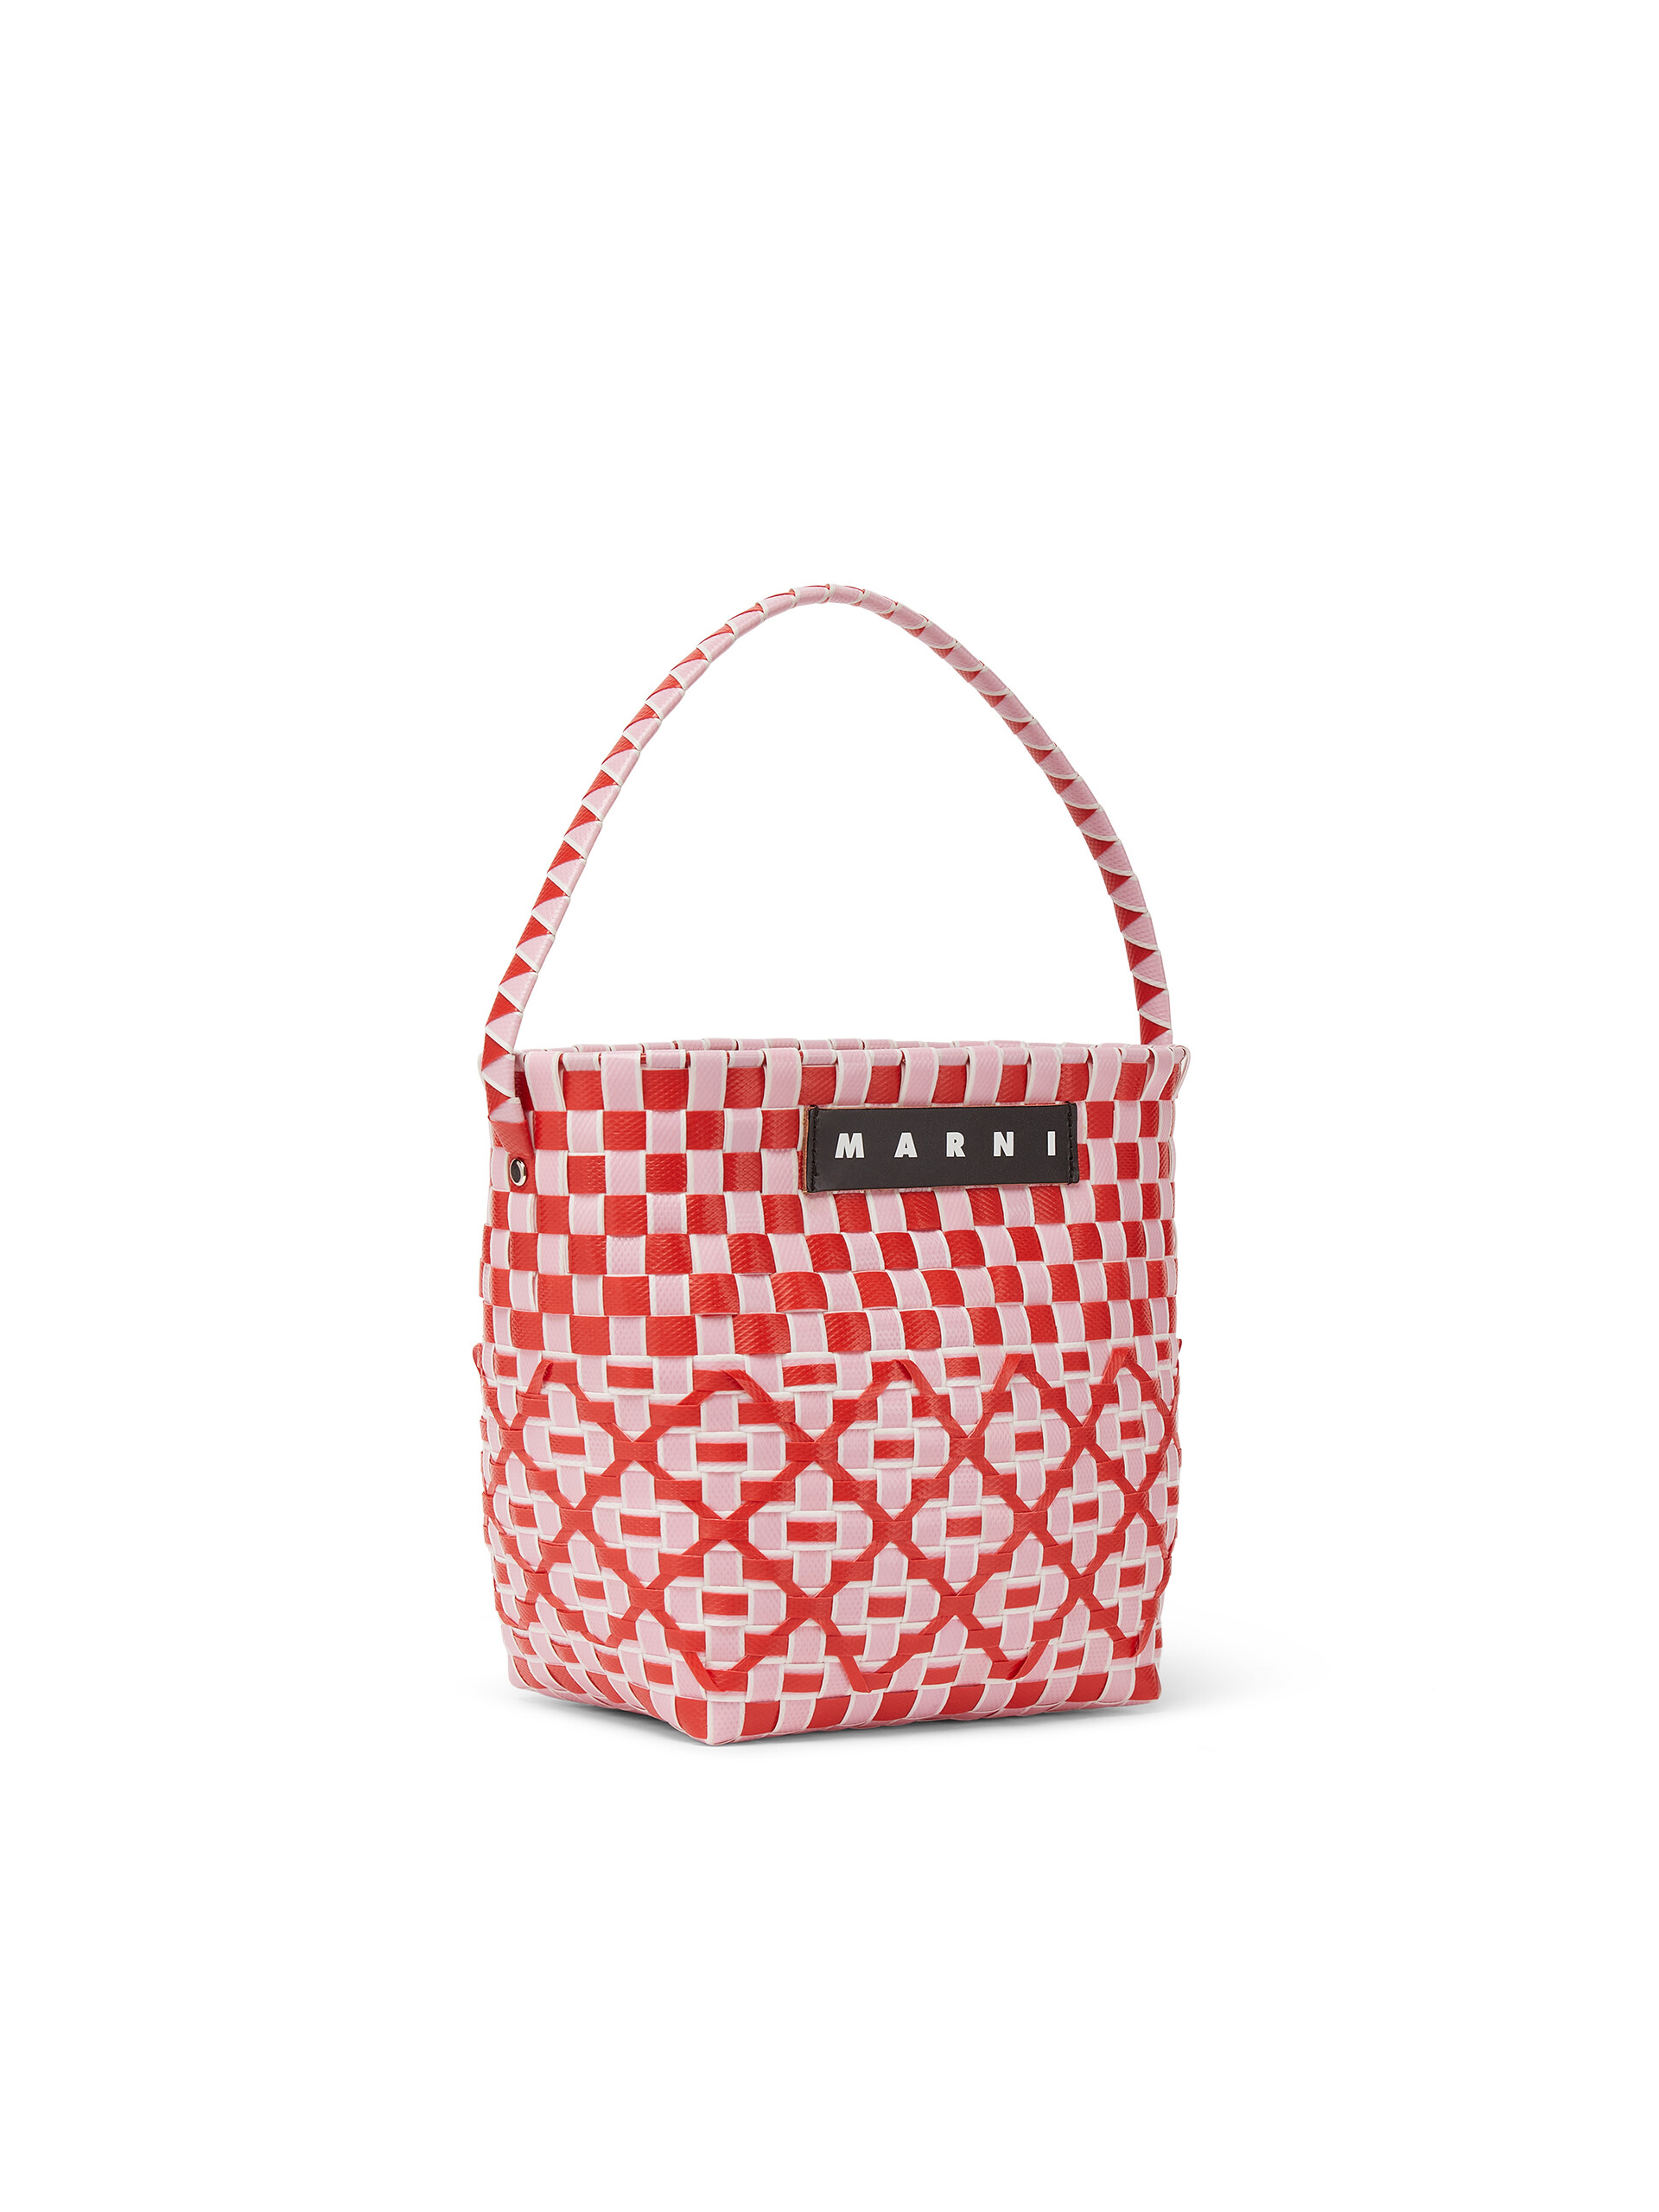 MARNI MARKET OVAL BASKET bag in orange and black woven material - Shopping Bags - Image 2